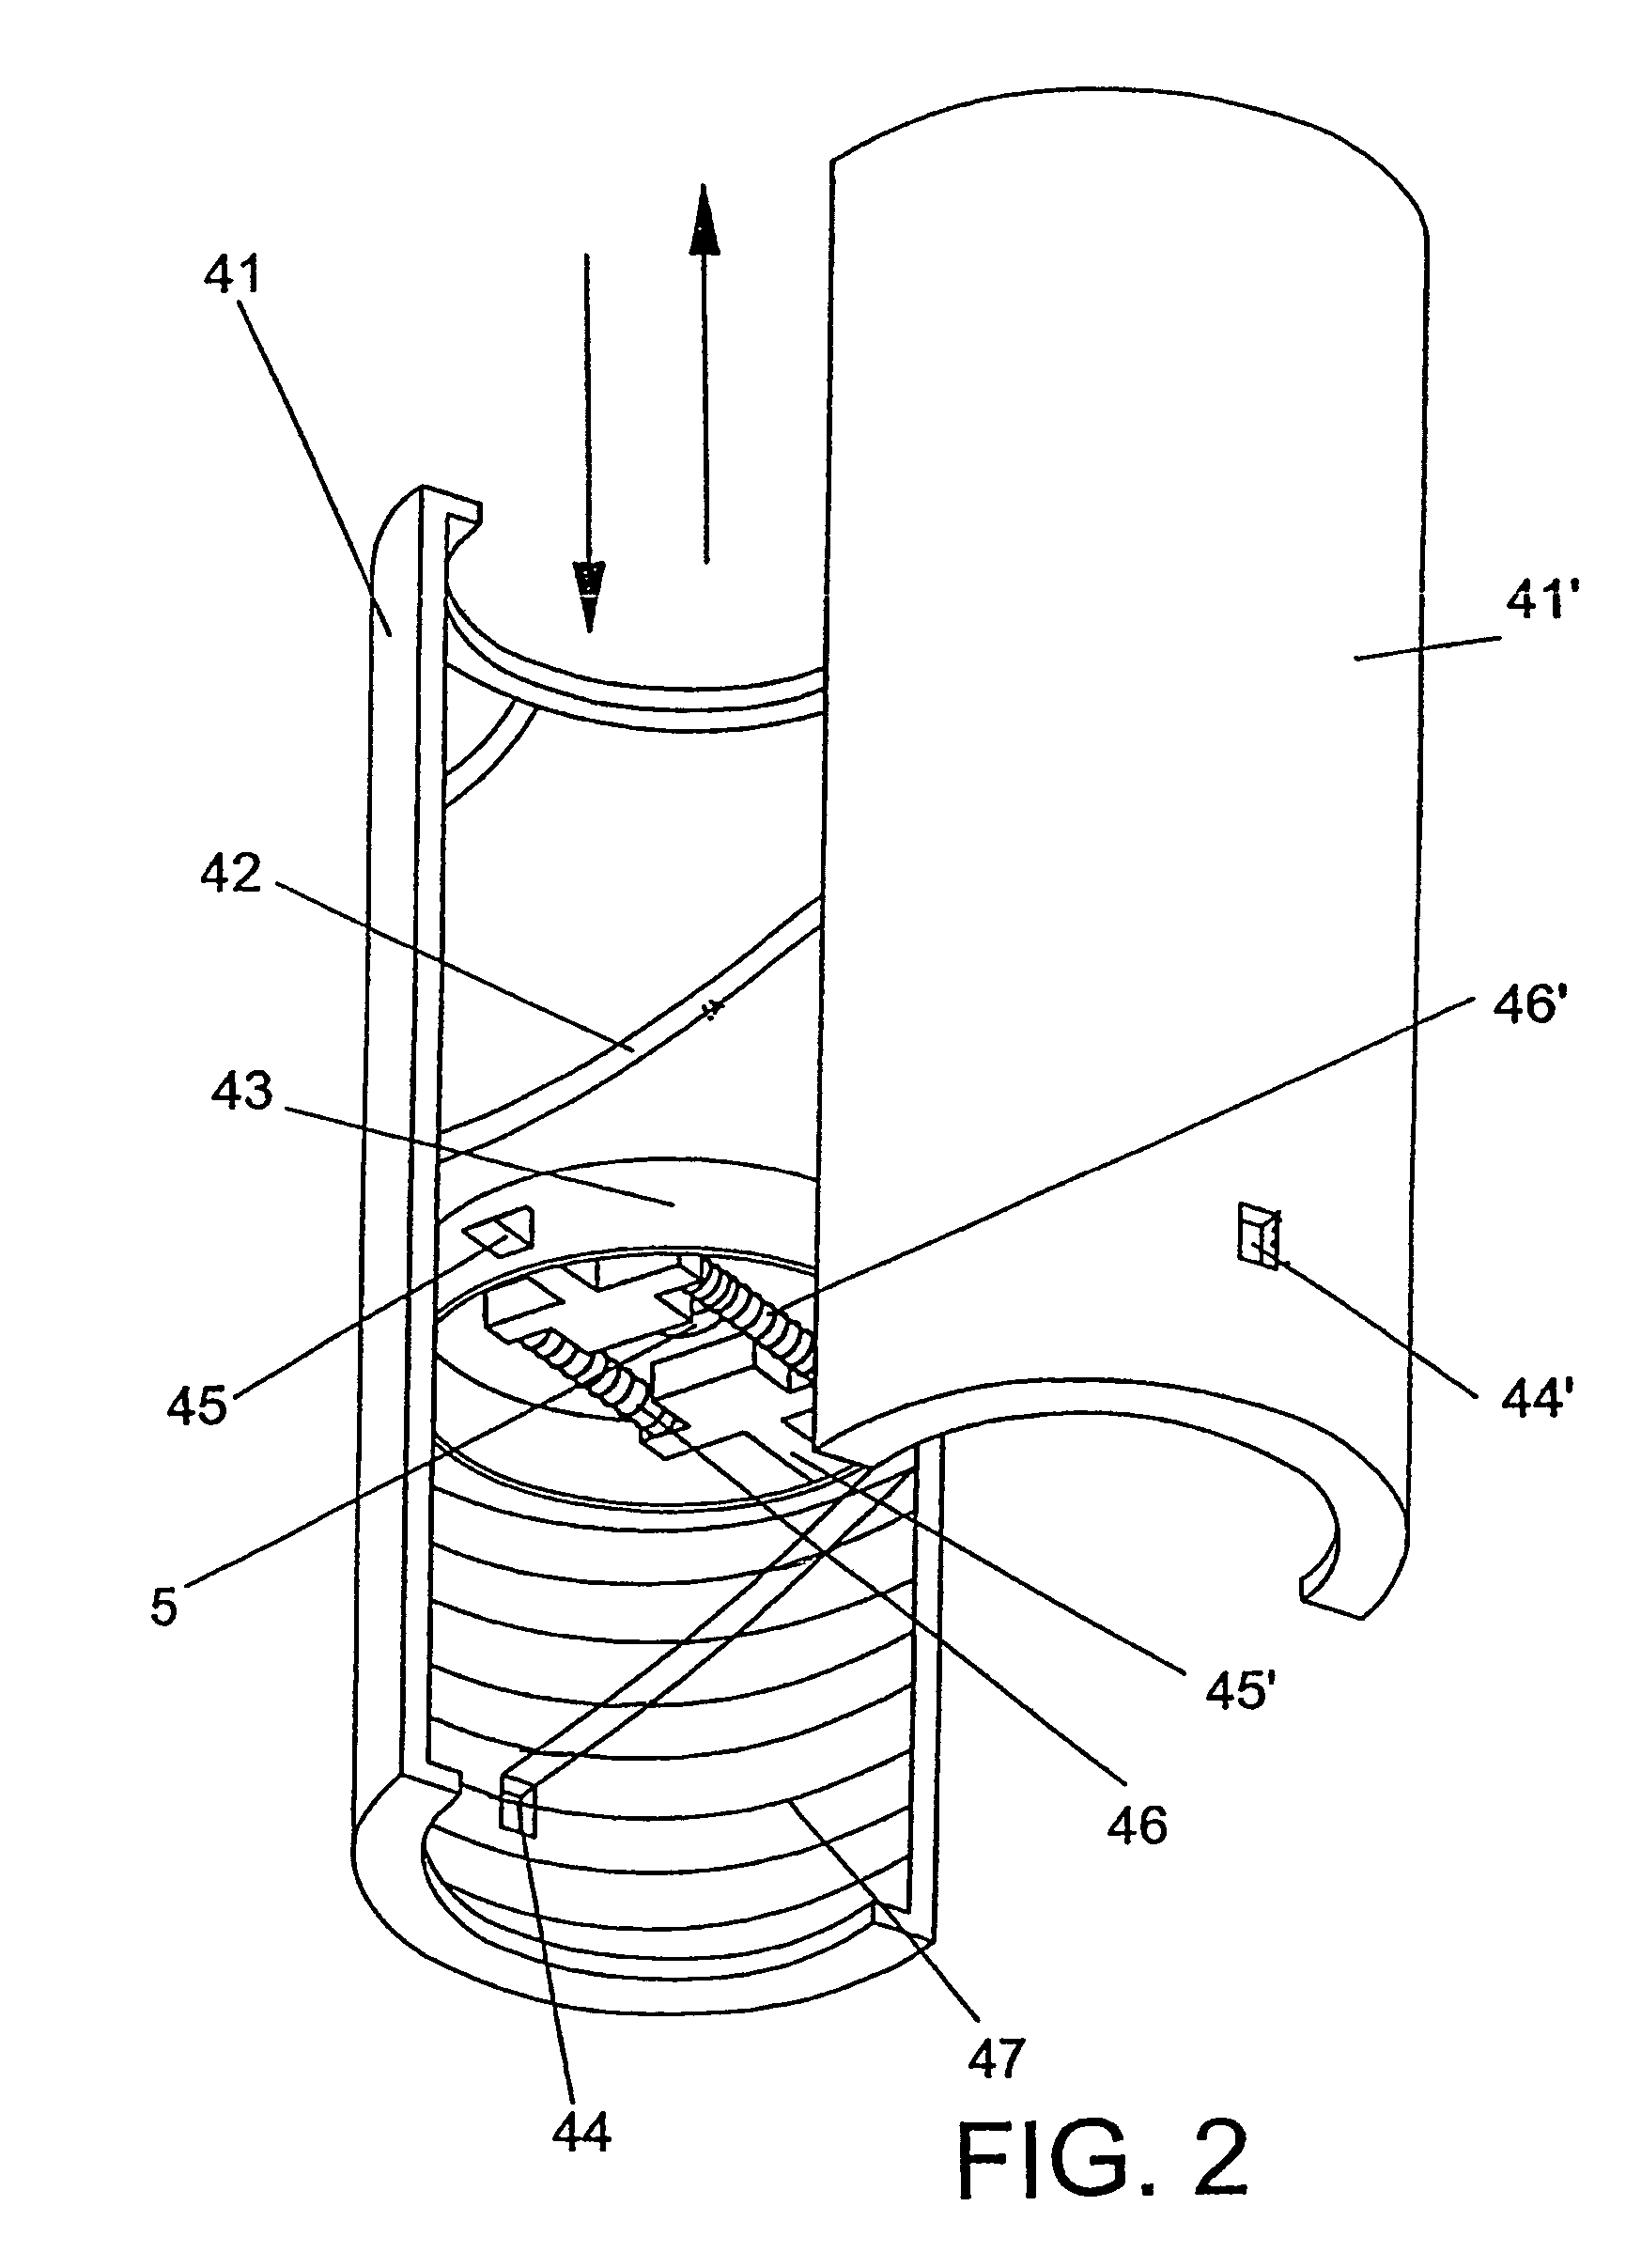 Device for destroying sharp, pointed objects which is fitted with means for automatically unscrewing injecting needles and similar